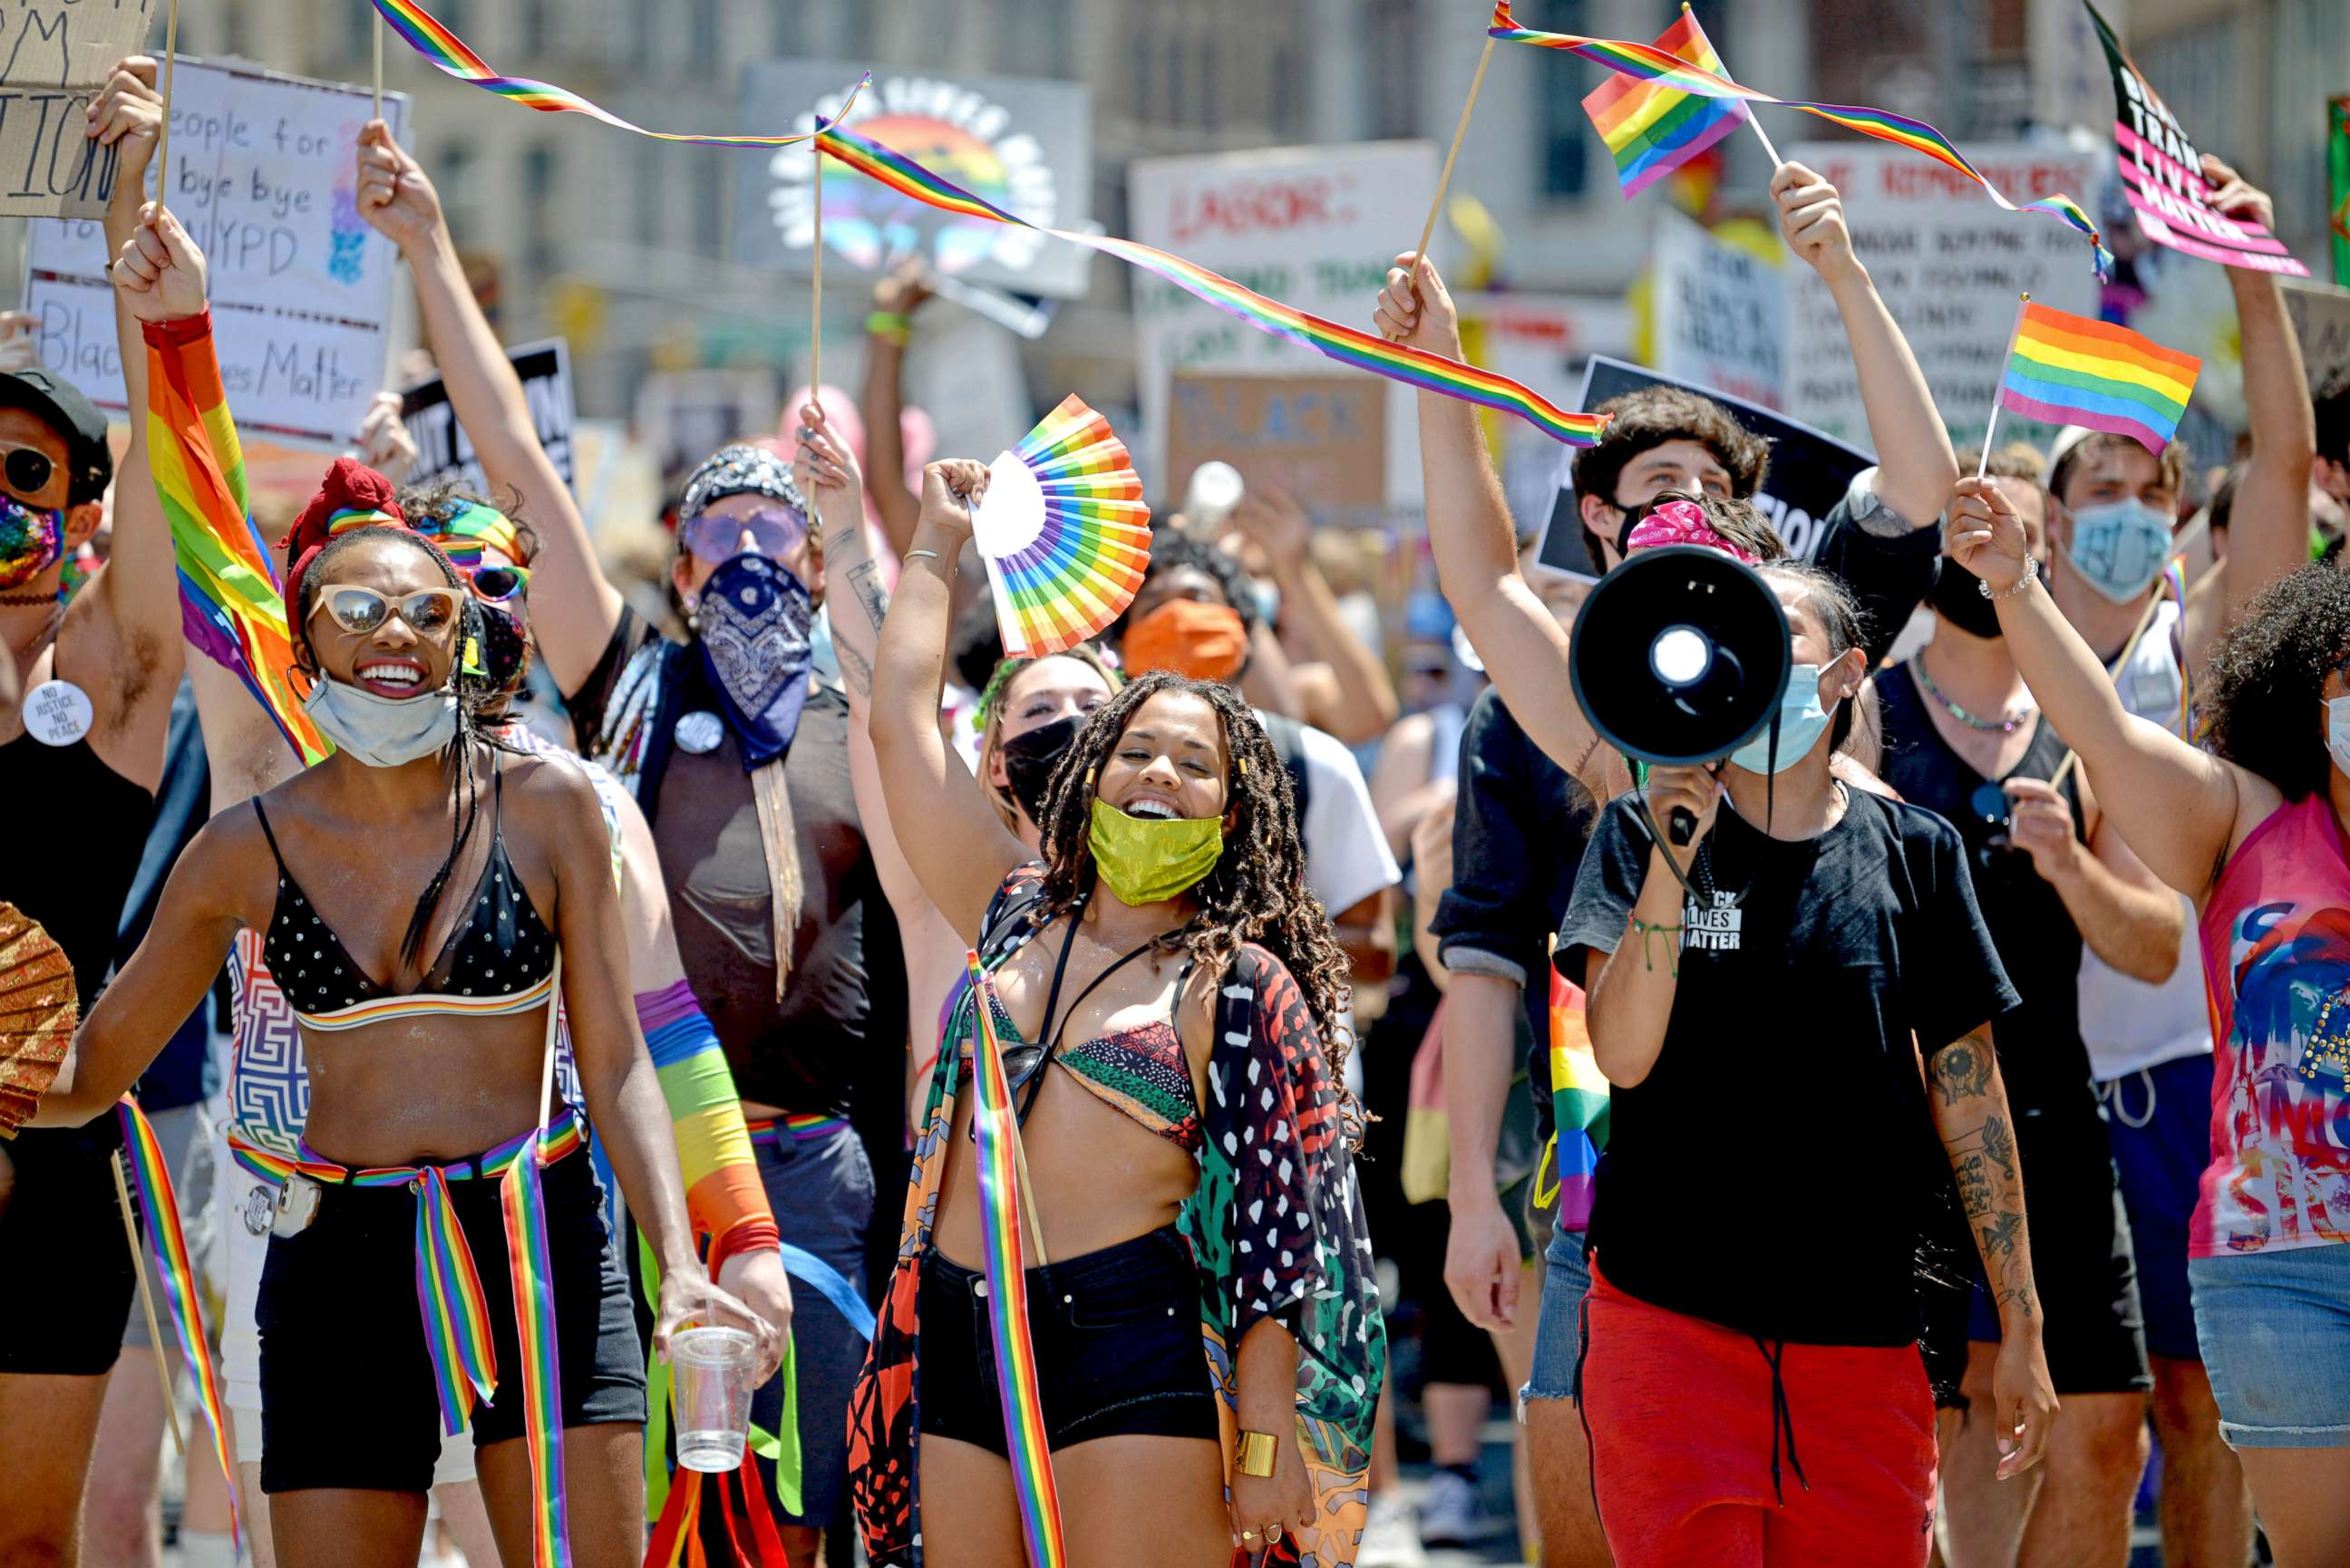 PHOTO: Marchers are seen smiling and waving during the Queer Liberation March for Black Lives & Against Police Brutality on June 28, 2020 in New York City.